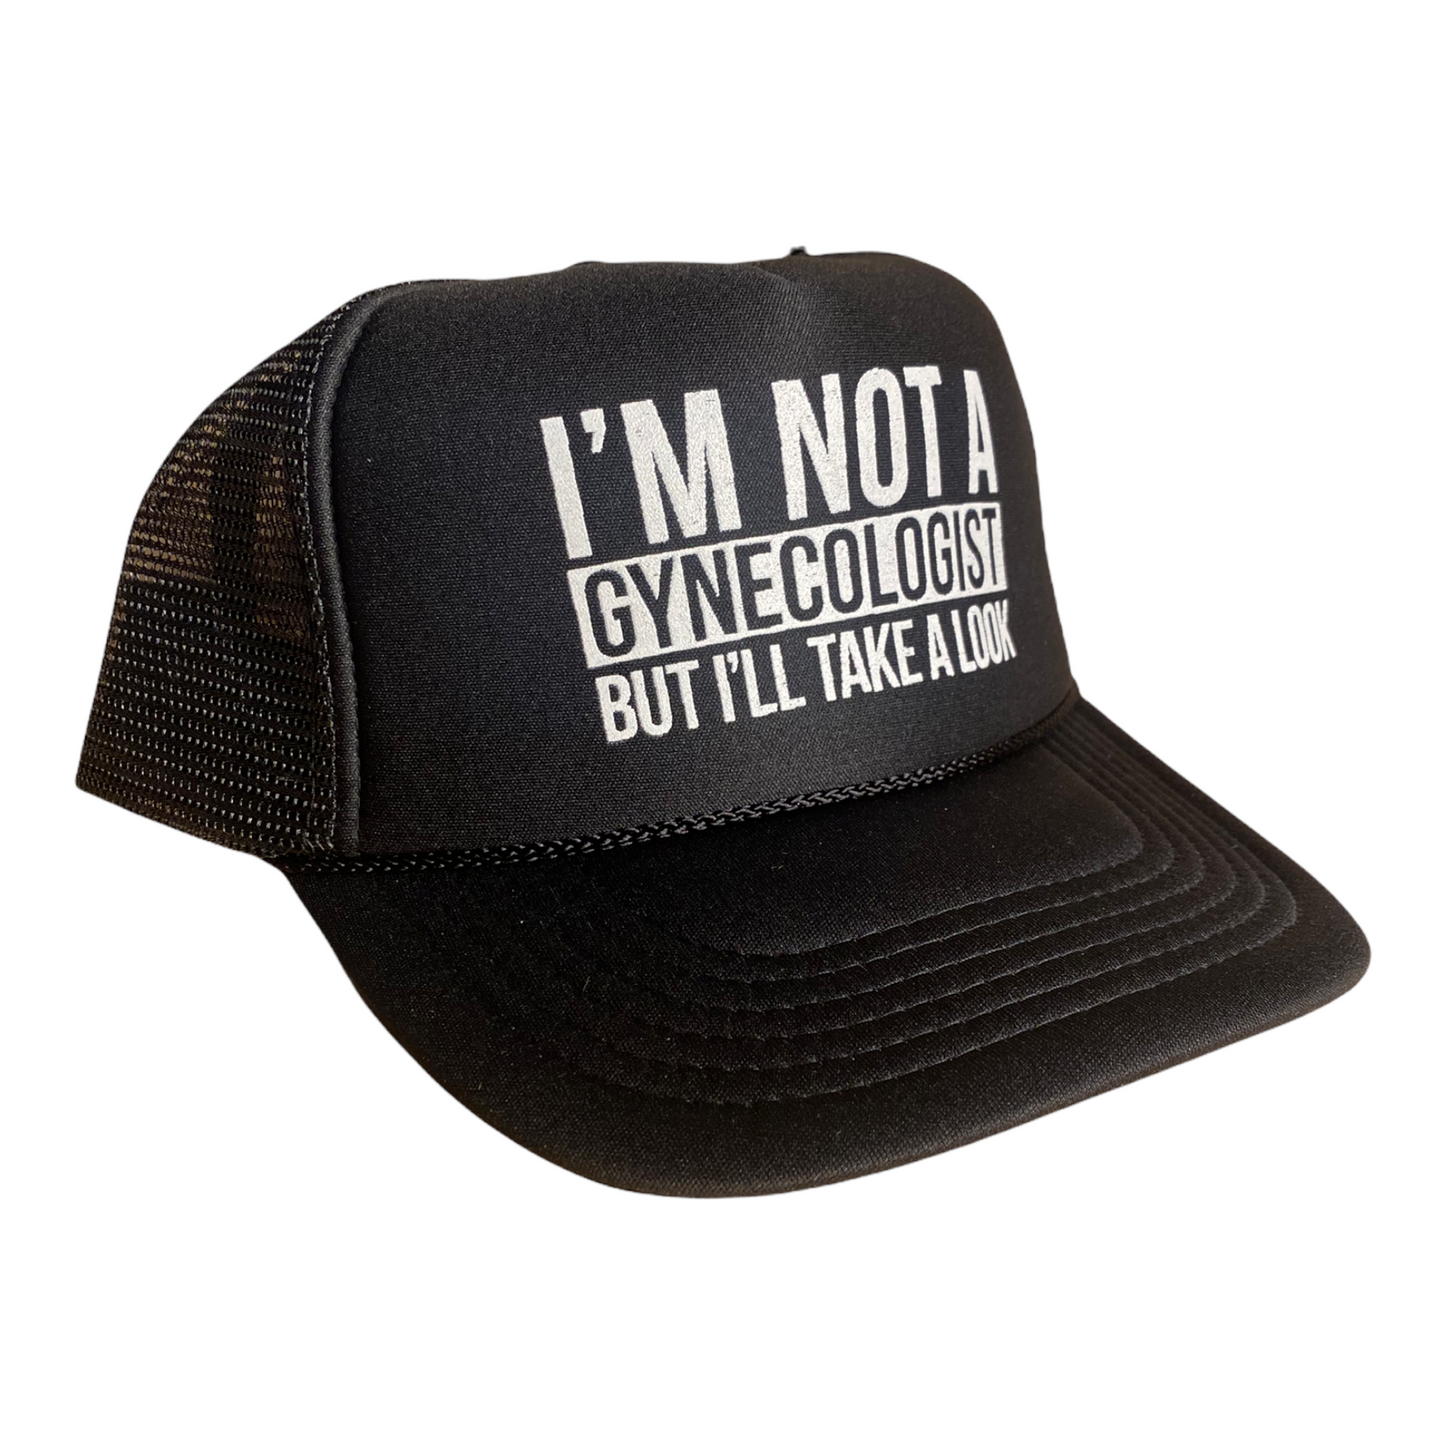 I'm Not A Gynecologist But I'll Take A Look Trucker Hat Funny Trucker Hat Black